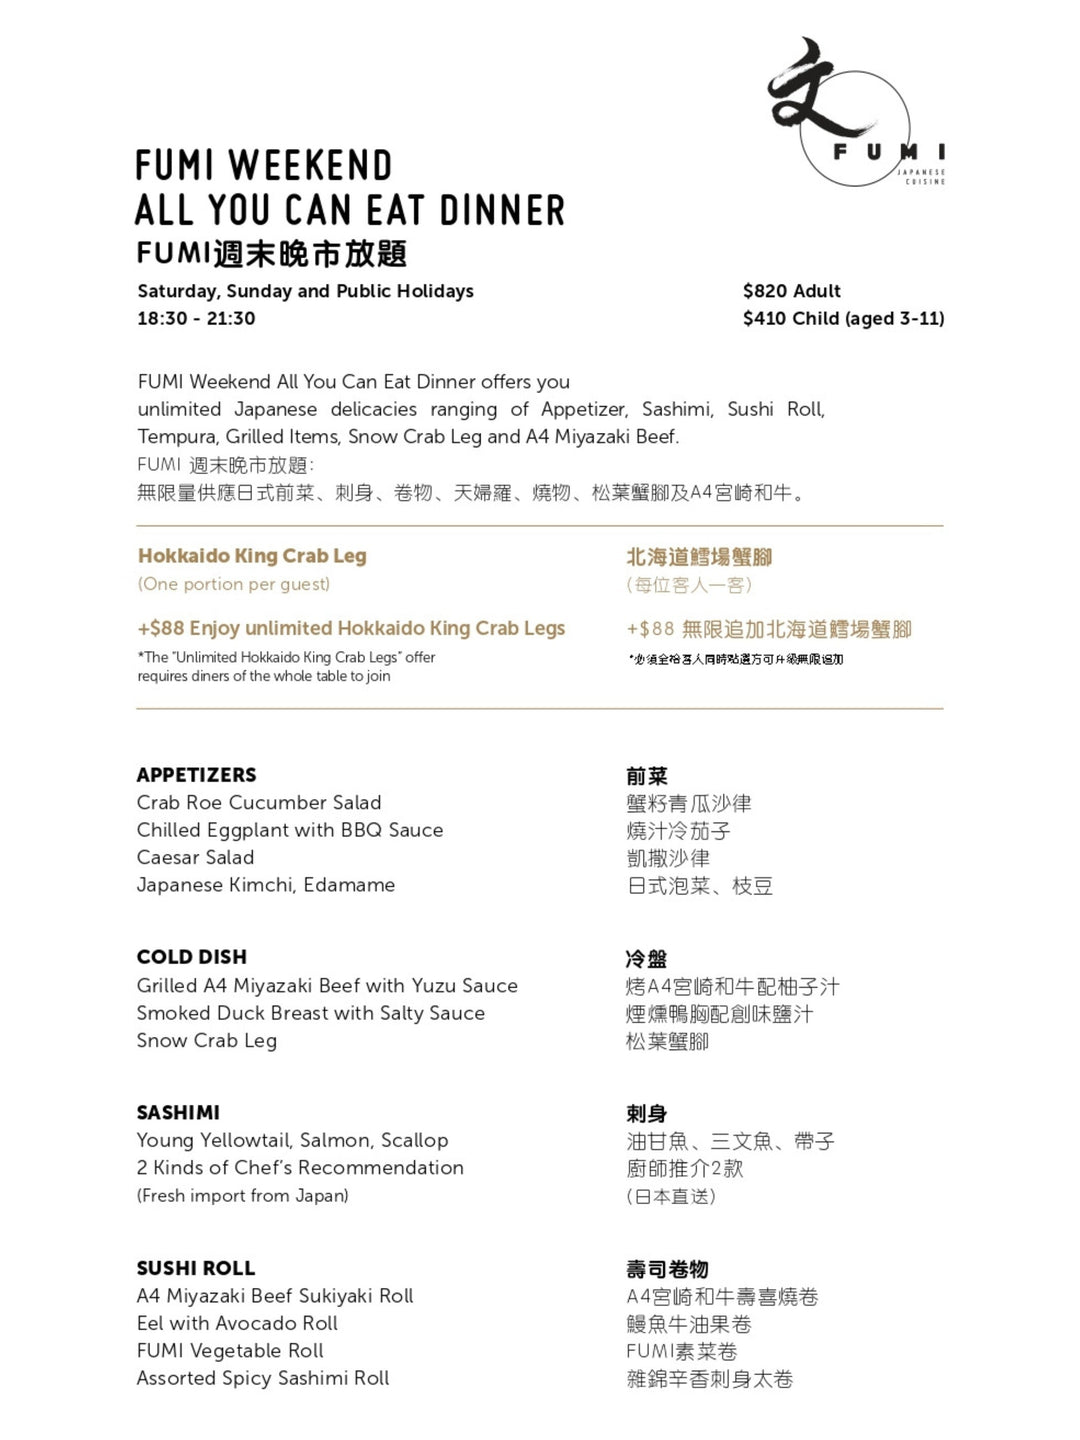 FUMI Father's Day All-you-can-eat Dinner (June 18)